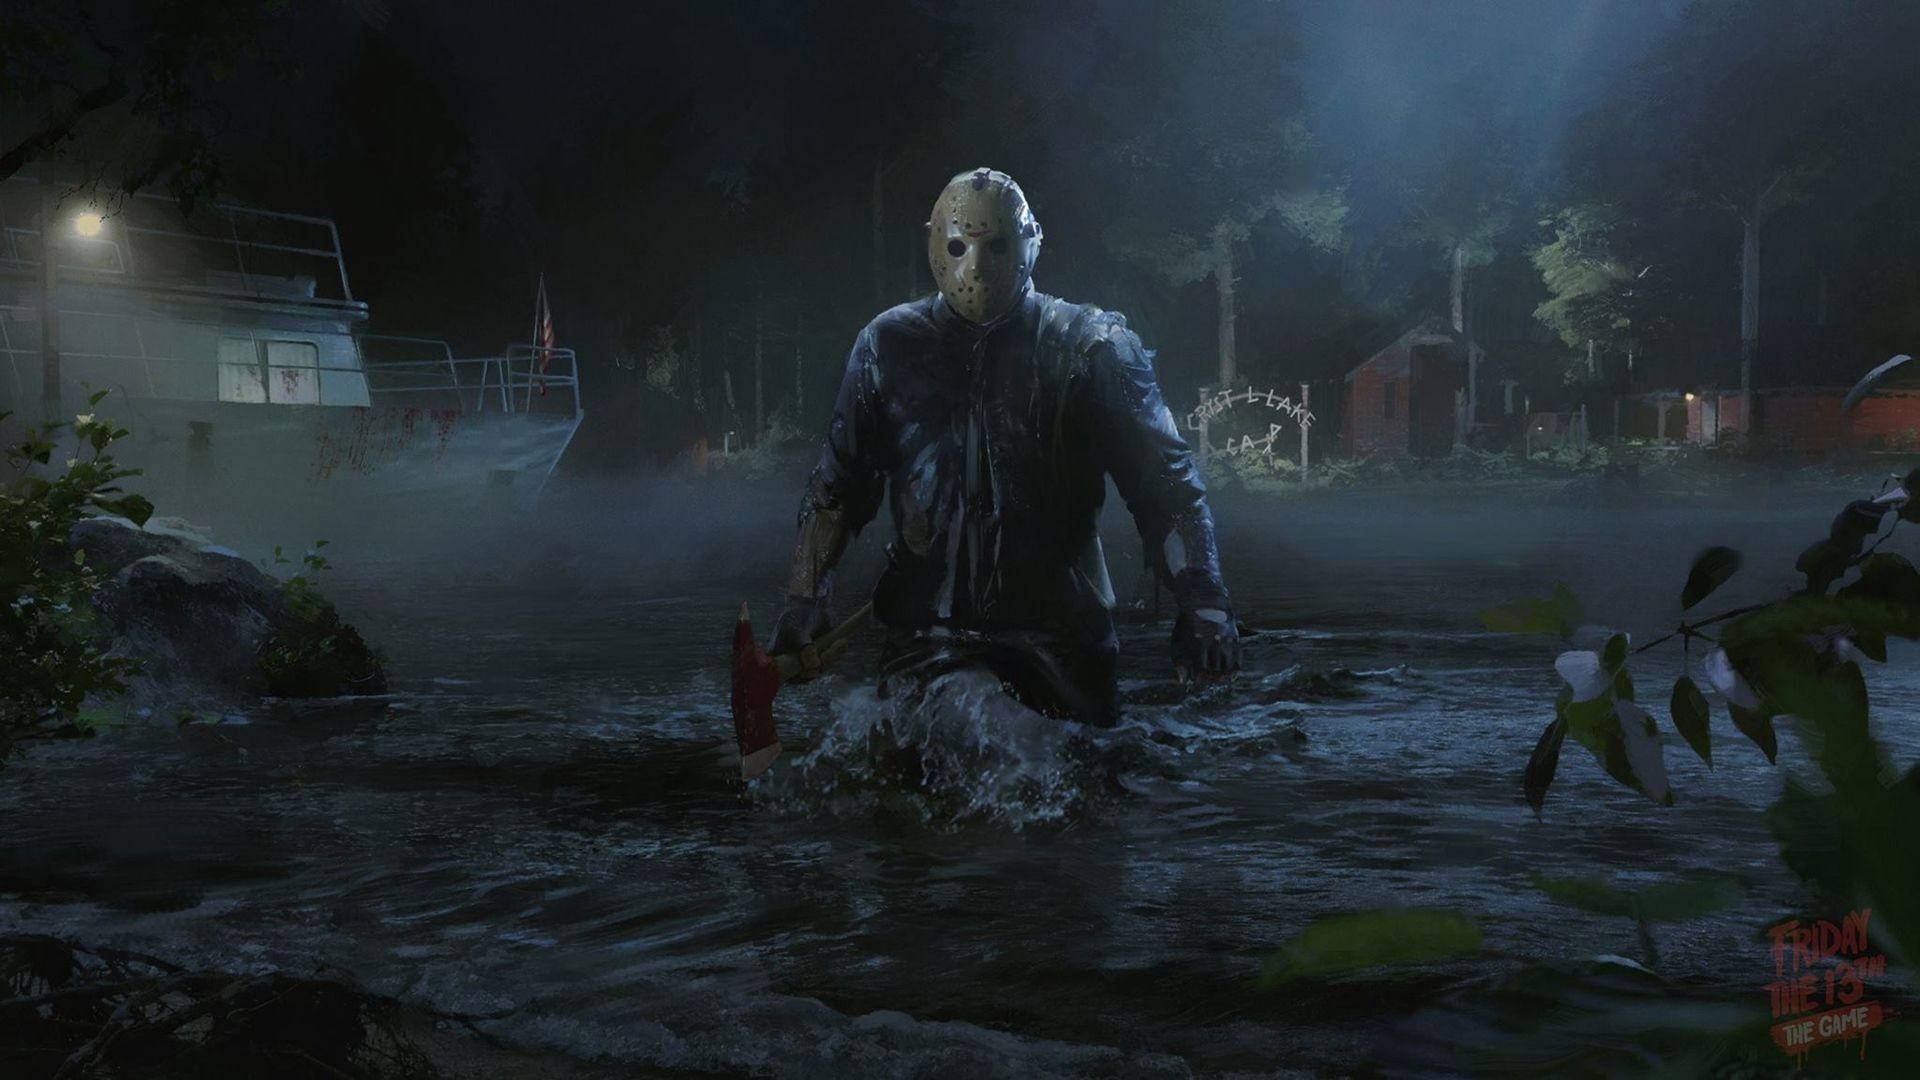 1920x1080 Jason Voorhees Friday the 13th Game Wallpaper #44735